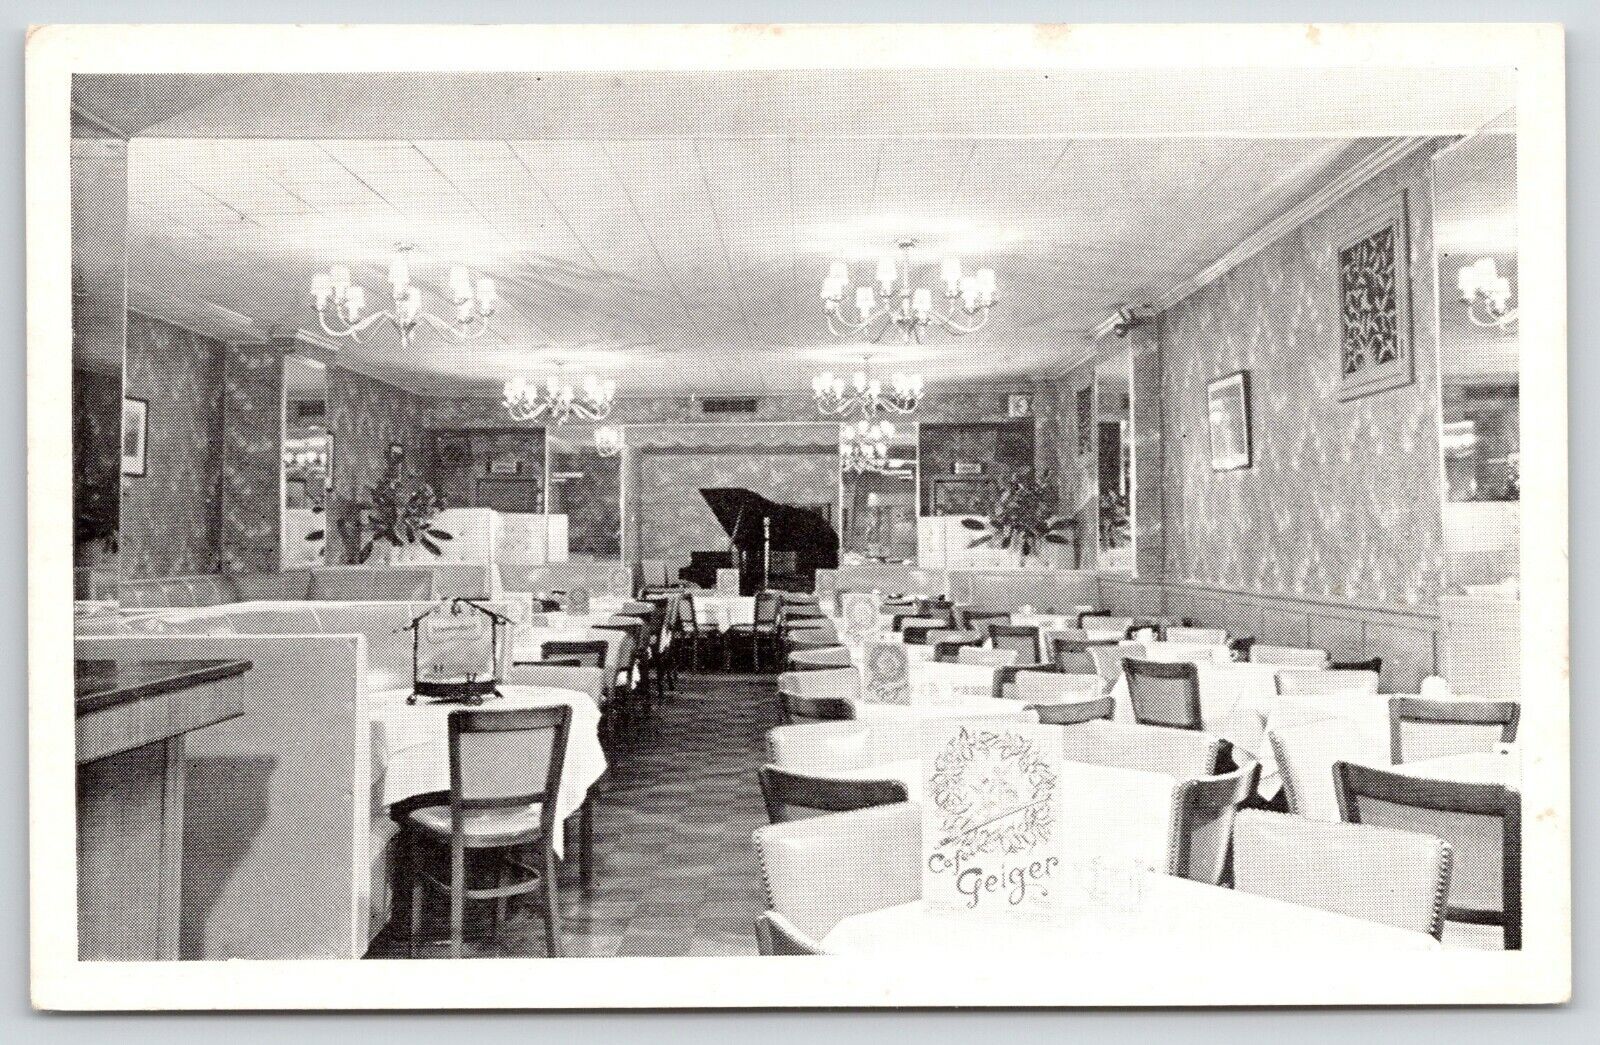 New York City~Cafe Geiger Interior~Baby Grand Piano~East 86th Street~1950s